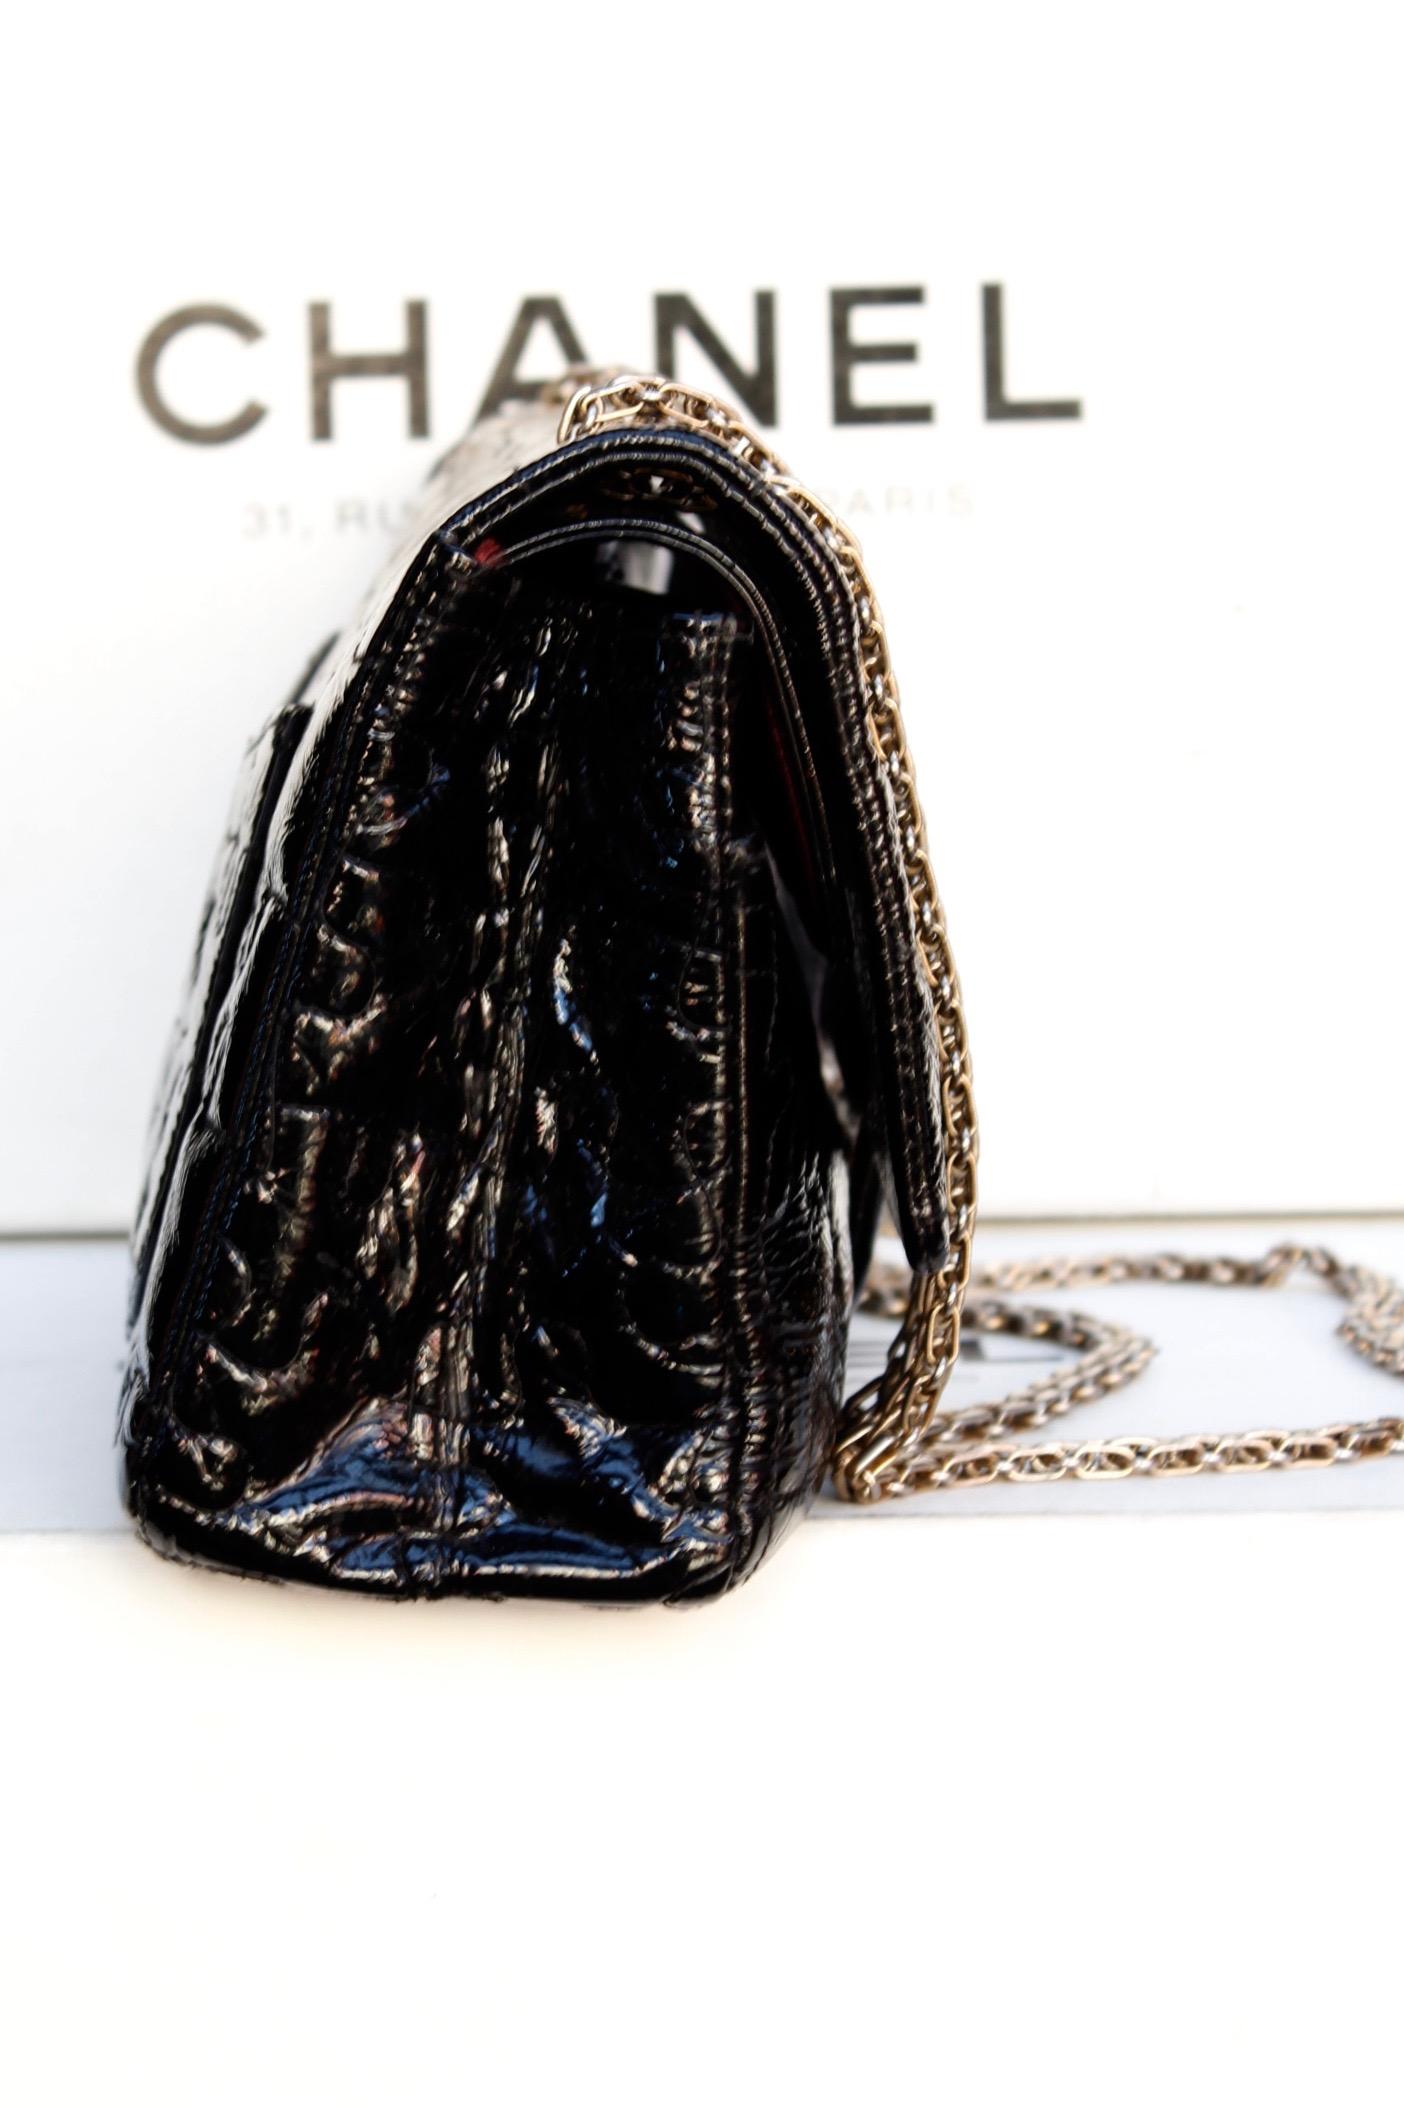 CHANEL (Made in France) Lovely 2.55 bag, composed of quilted patent leather, featuring over stitches representing a jigsaw puzzle, with a long gilded metal double handle and a back patch pocket.

The bag opens with the “Mademoiselle” gilded metal